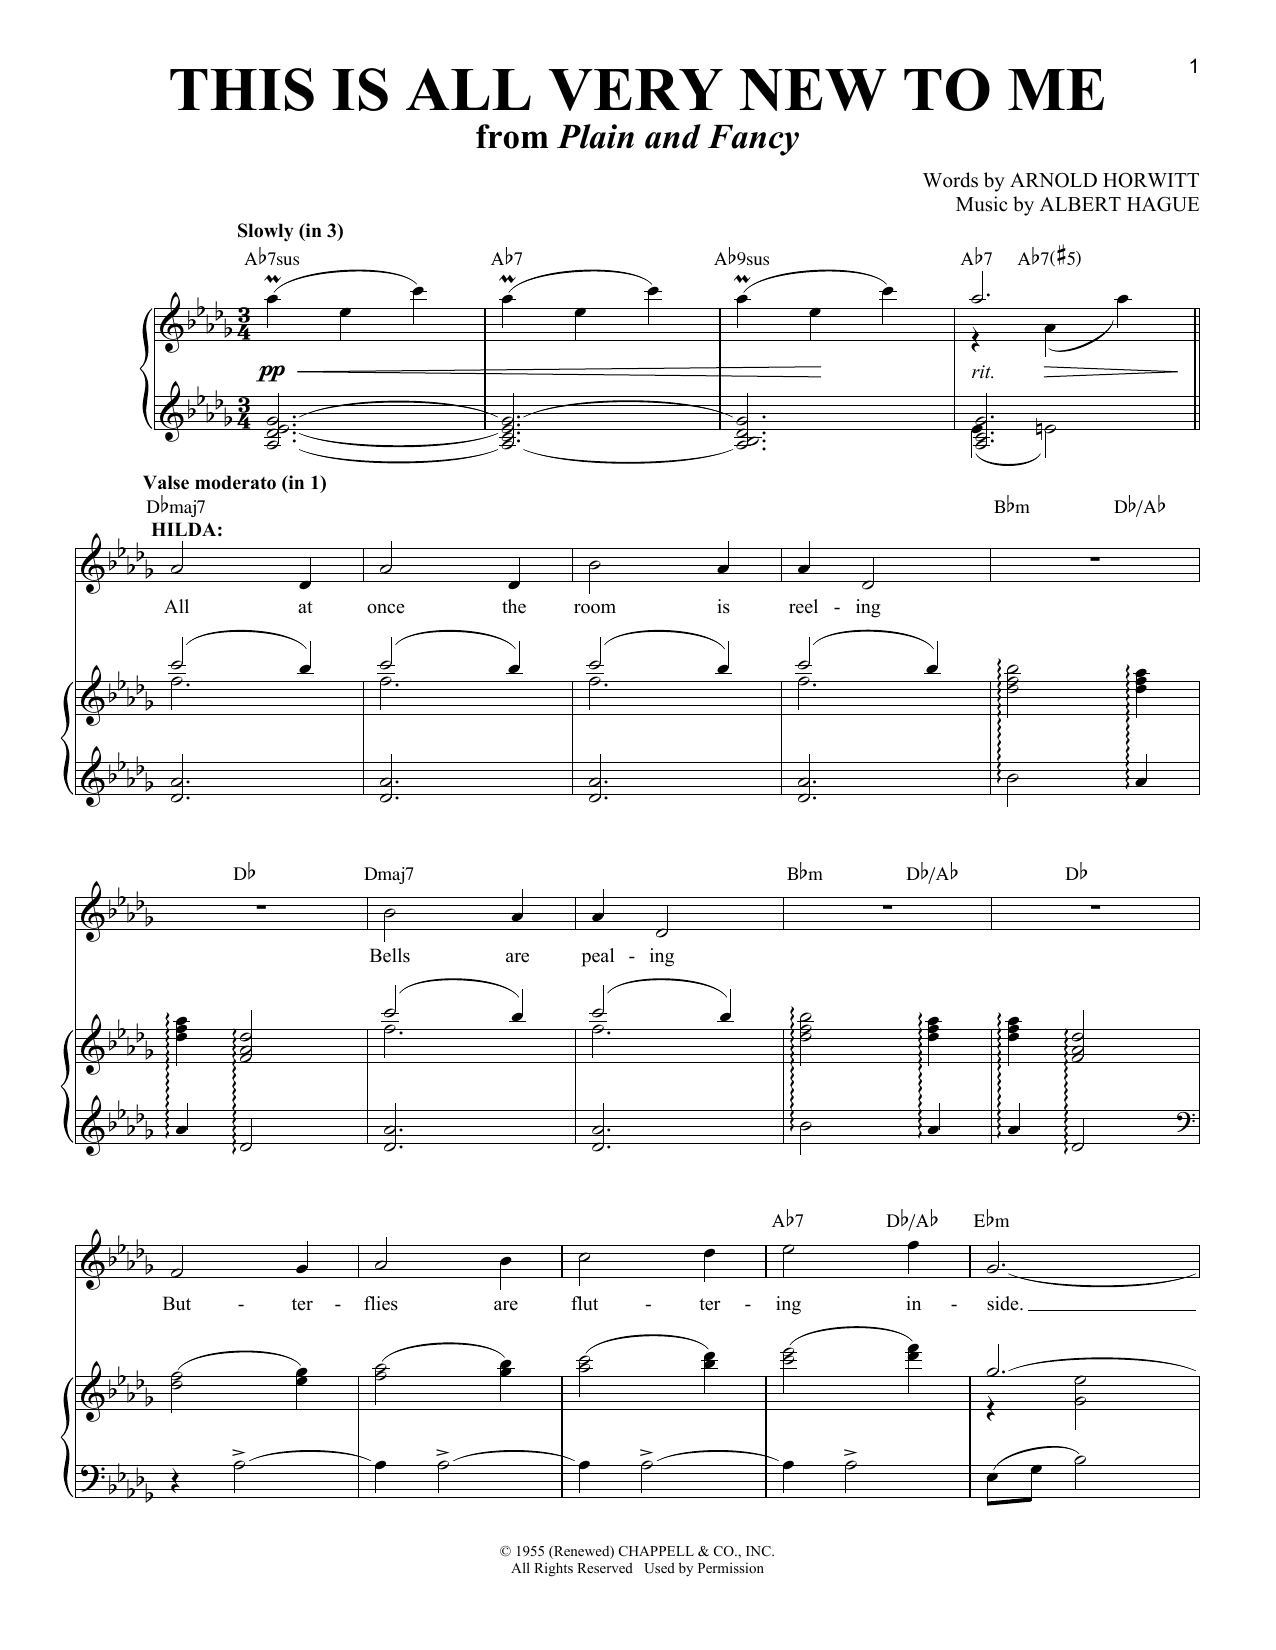 Download Arnold Horwitt and Albert Hague This Is All Very New To Me (from Plain Sheet Music